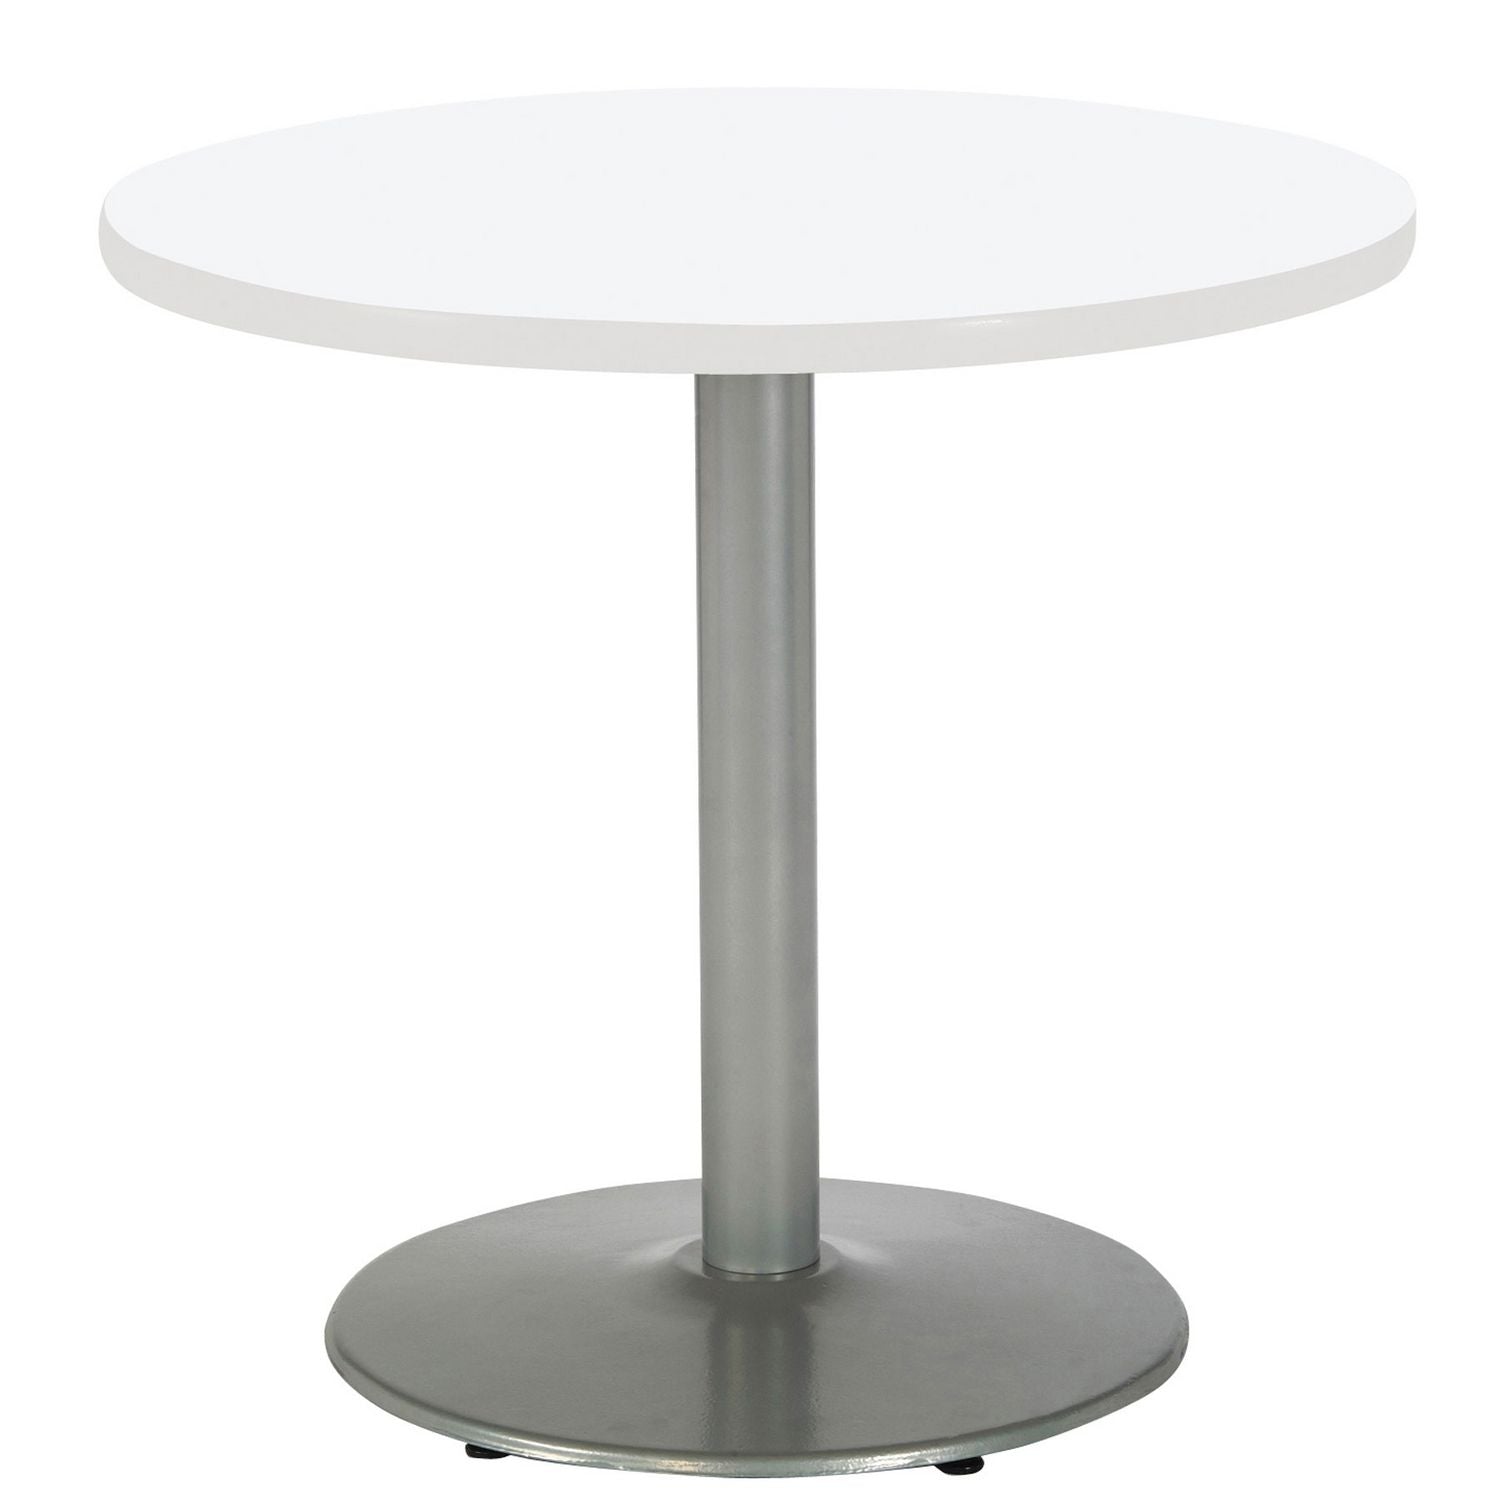 pedestal-table-with-four-lime-green-kool-series-chairs-round-36-dia-x-29h-designer-white-ships-in-4-6-business-days_kfi811774036726 - 2